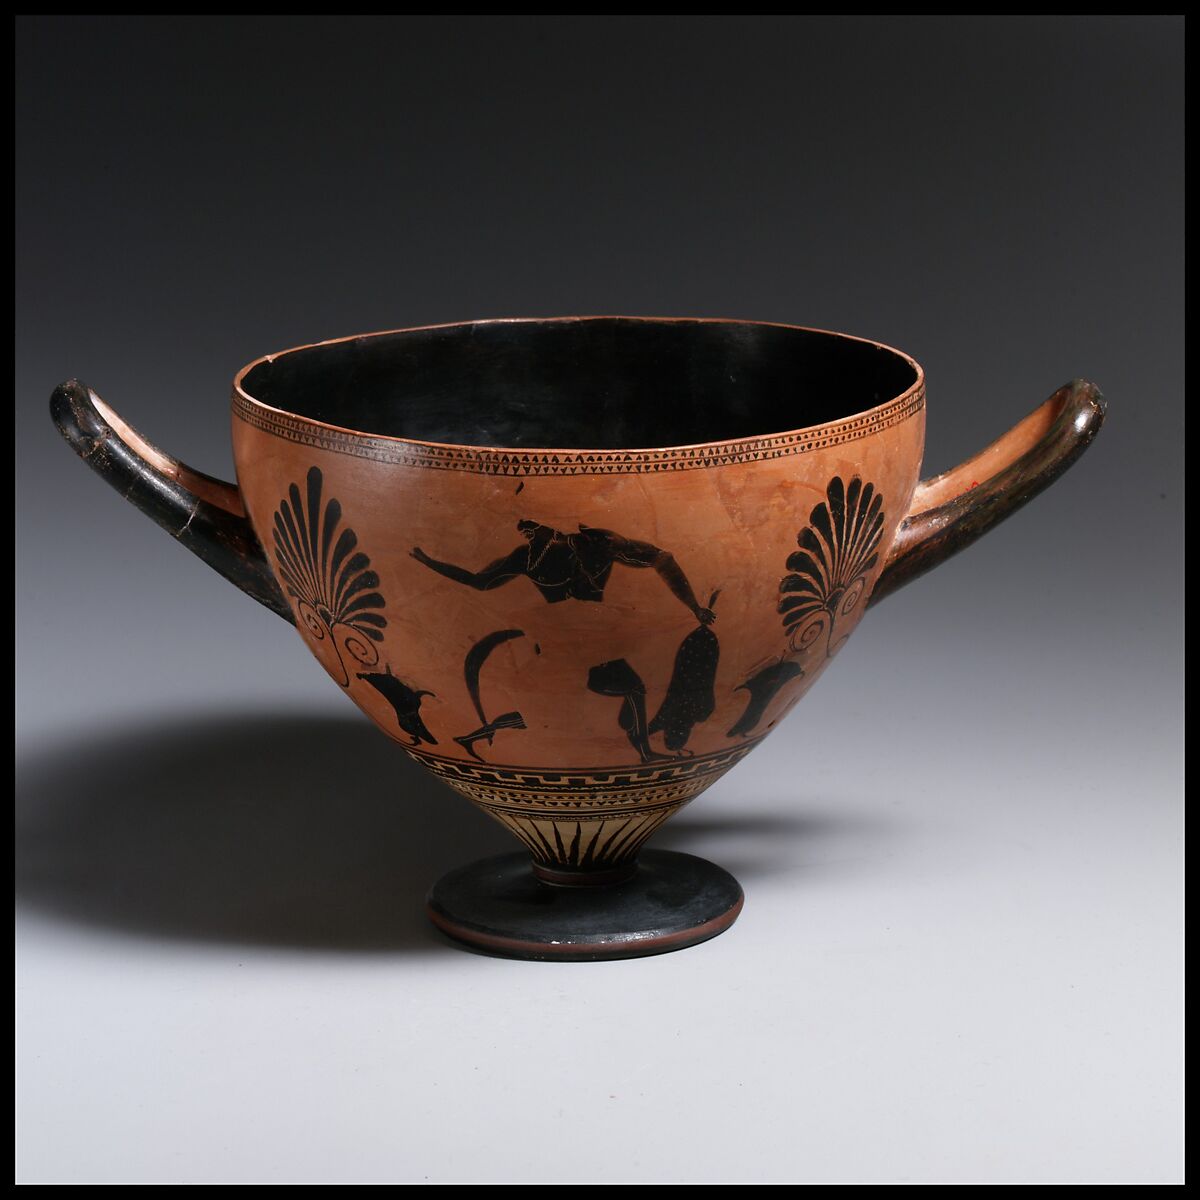 Terracotta skyphos (deep drinking cup), Attributed to or near Psiax, Terracotta, Greek, Attic 